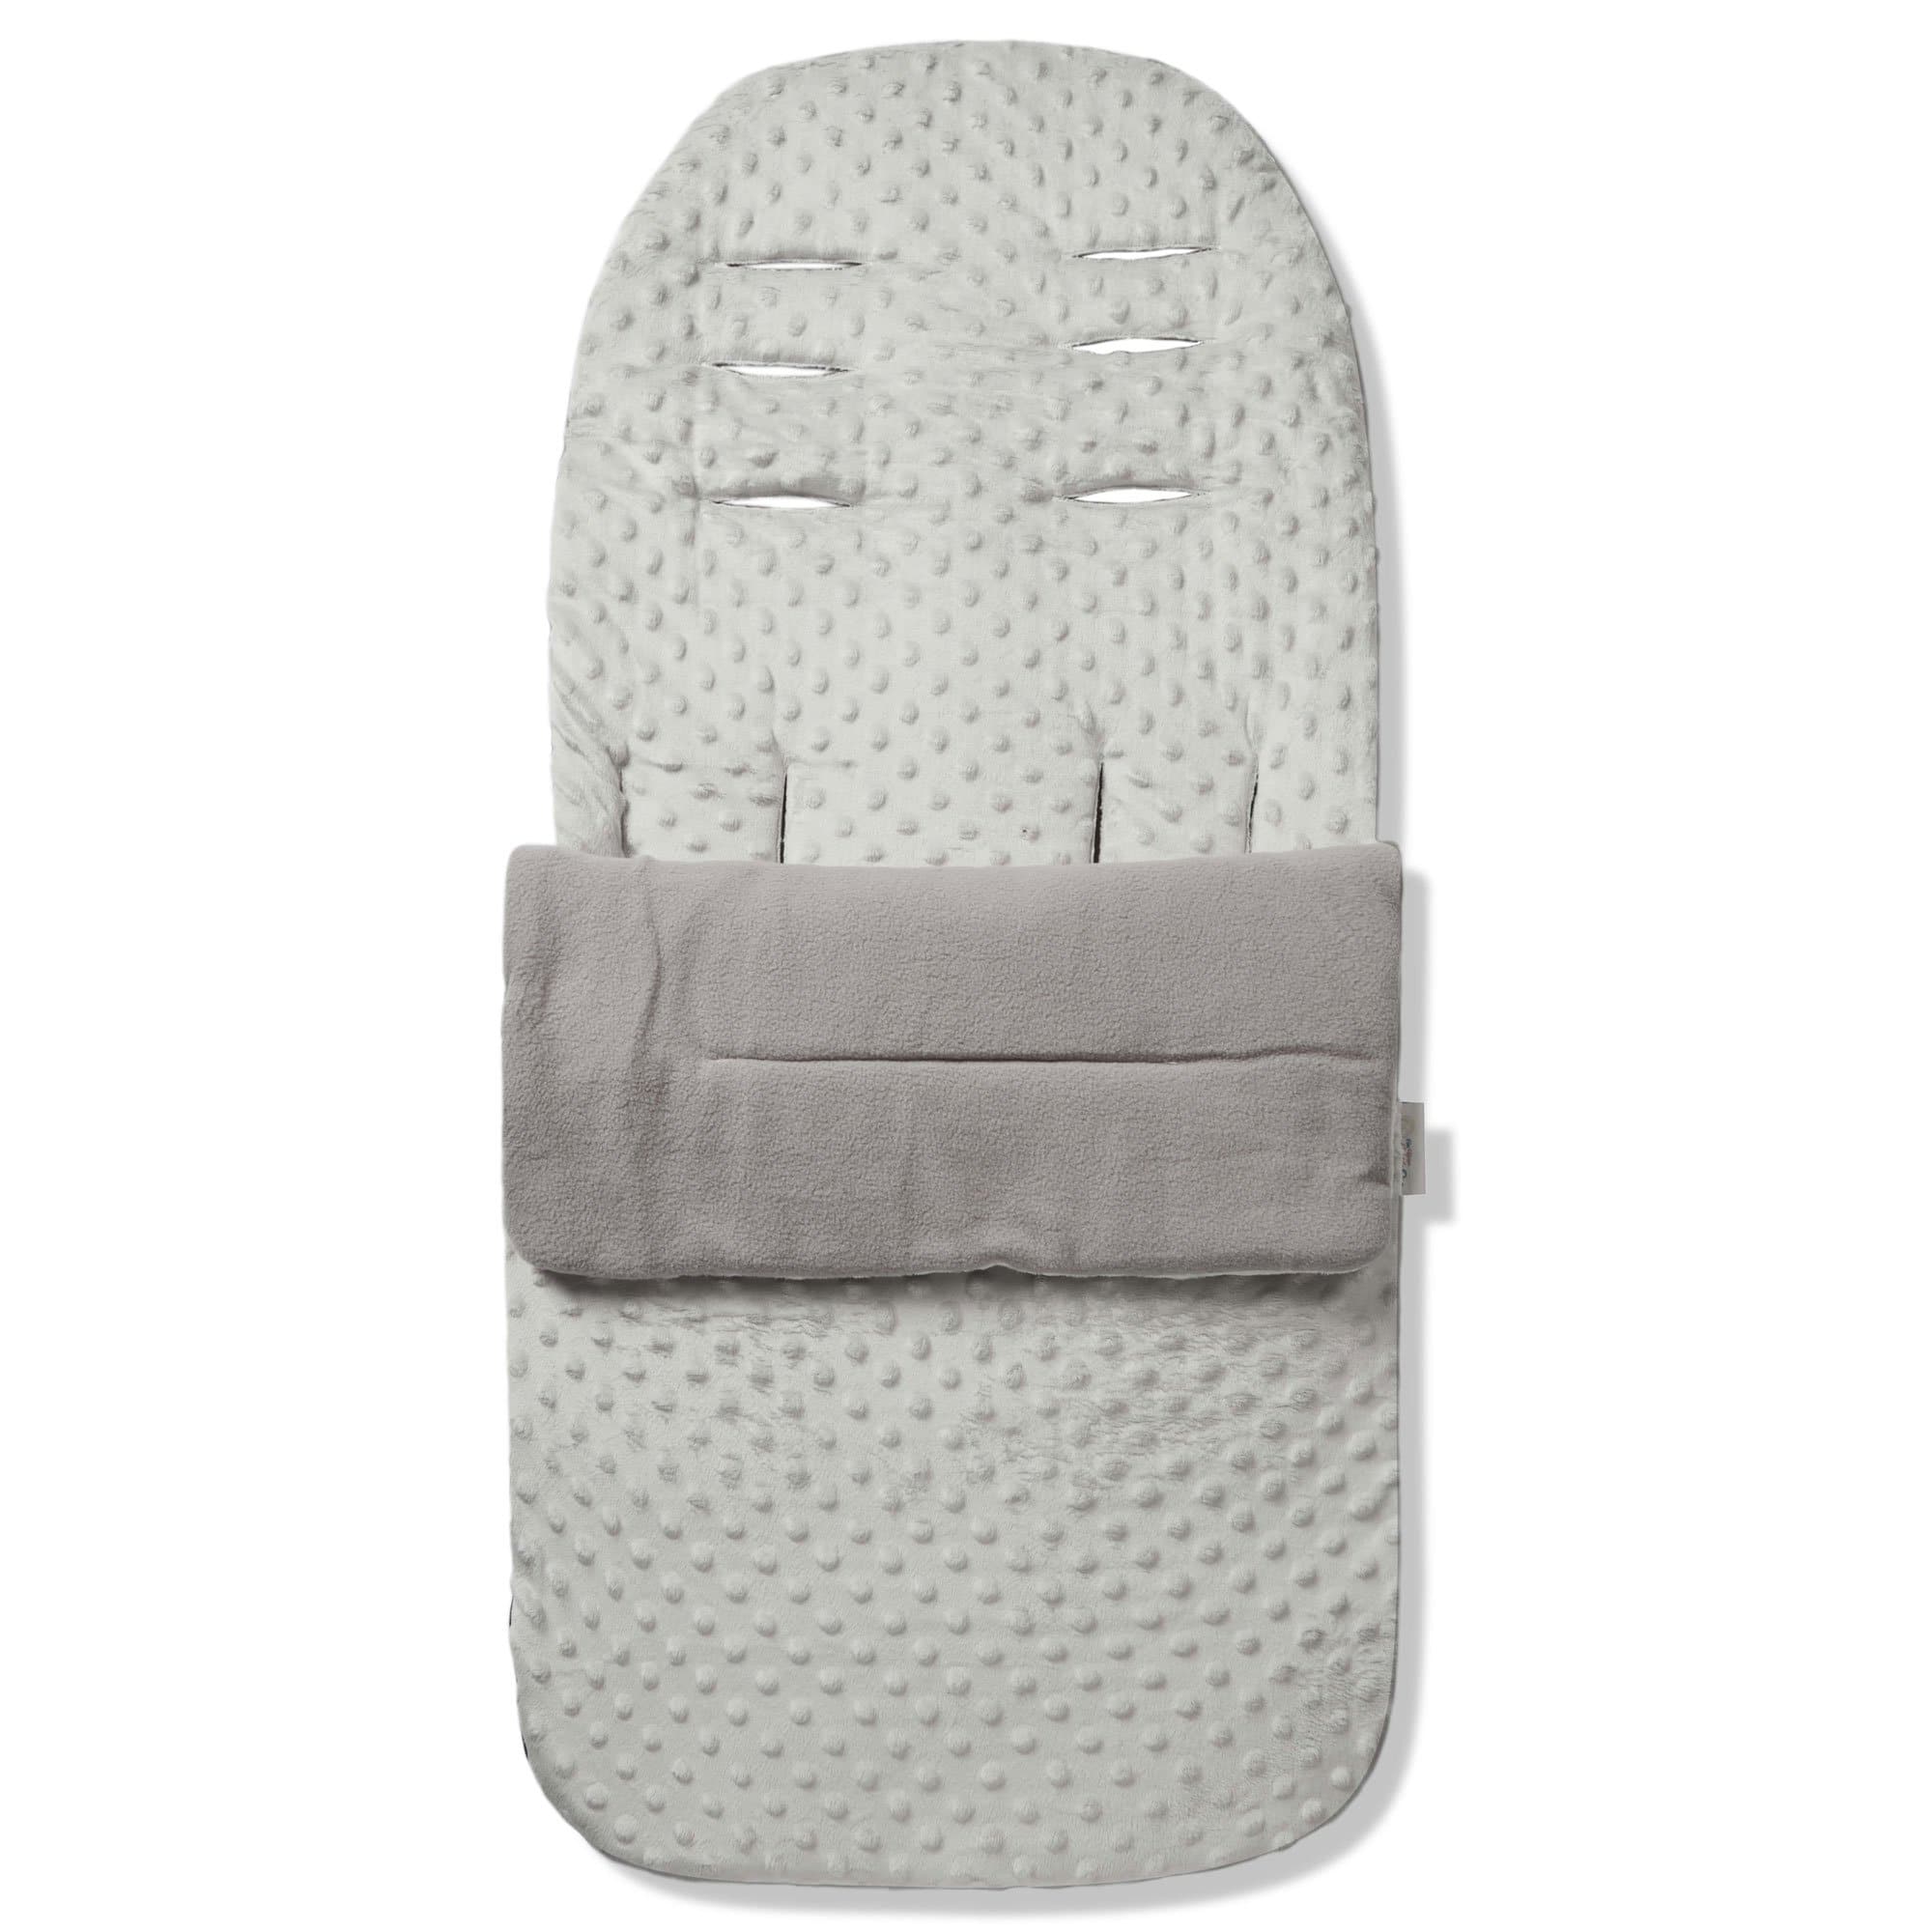 Dimple Footmuff / Cosy Toes Compatible with Baby Elegance - Grey / Fits All Models | For Your Little One